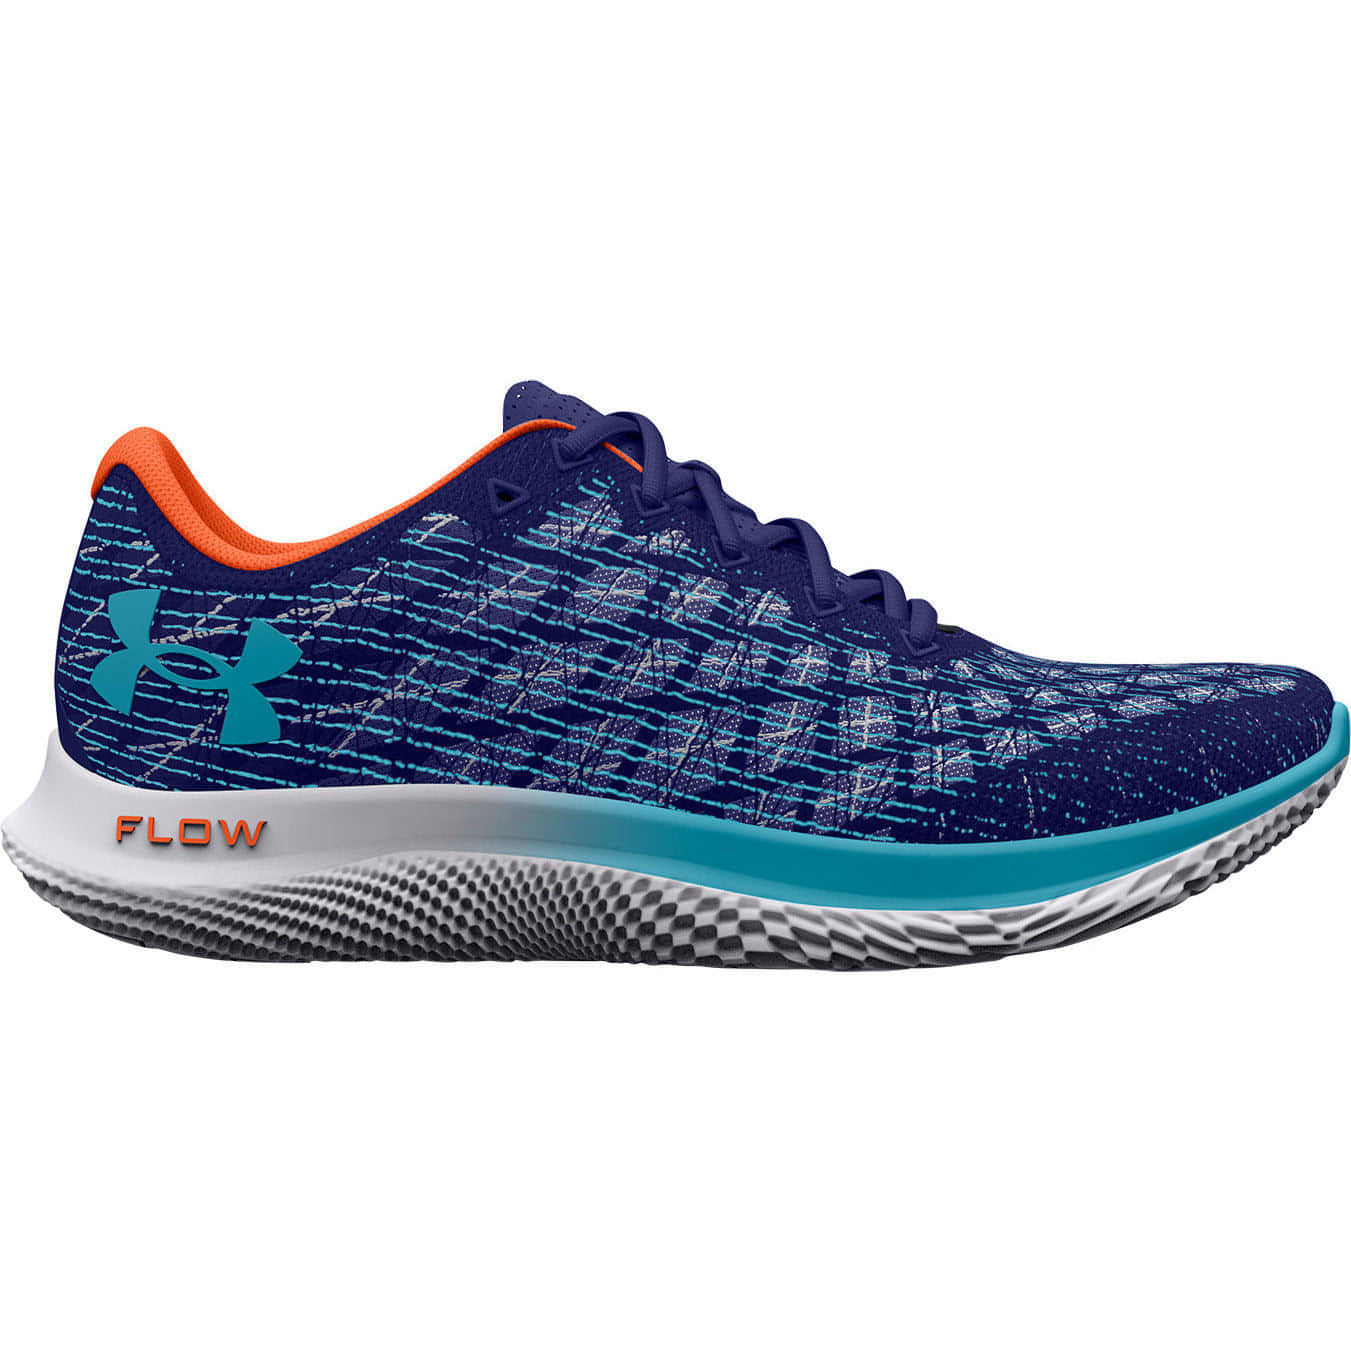 Under Armour Flow Velociti Wind 2 Mens Running Shoes - Blue